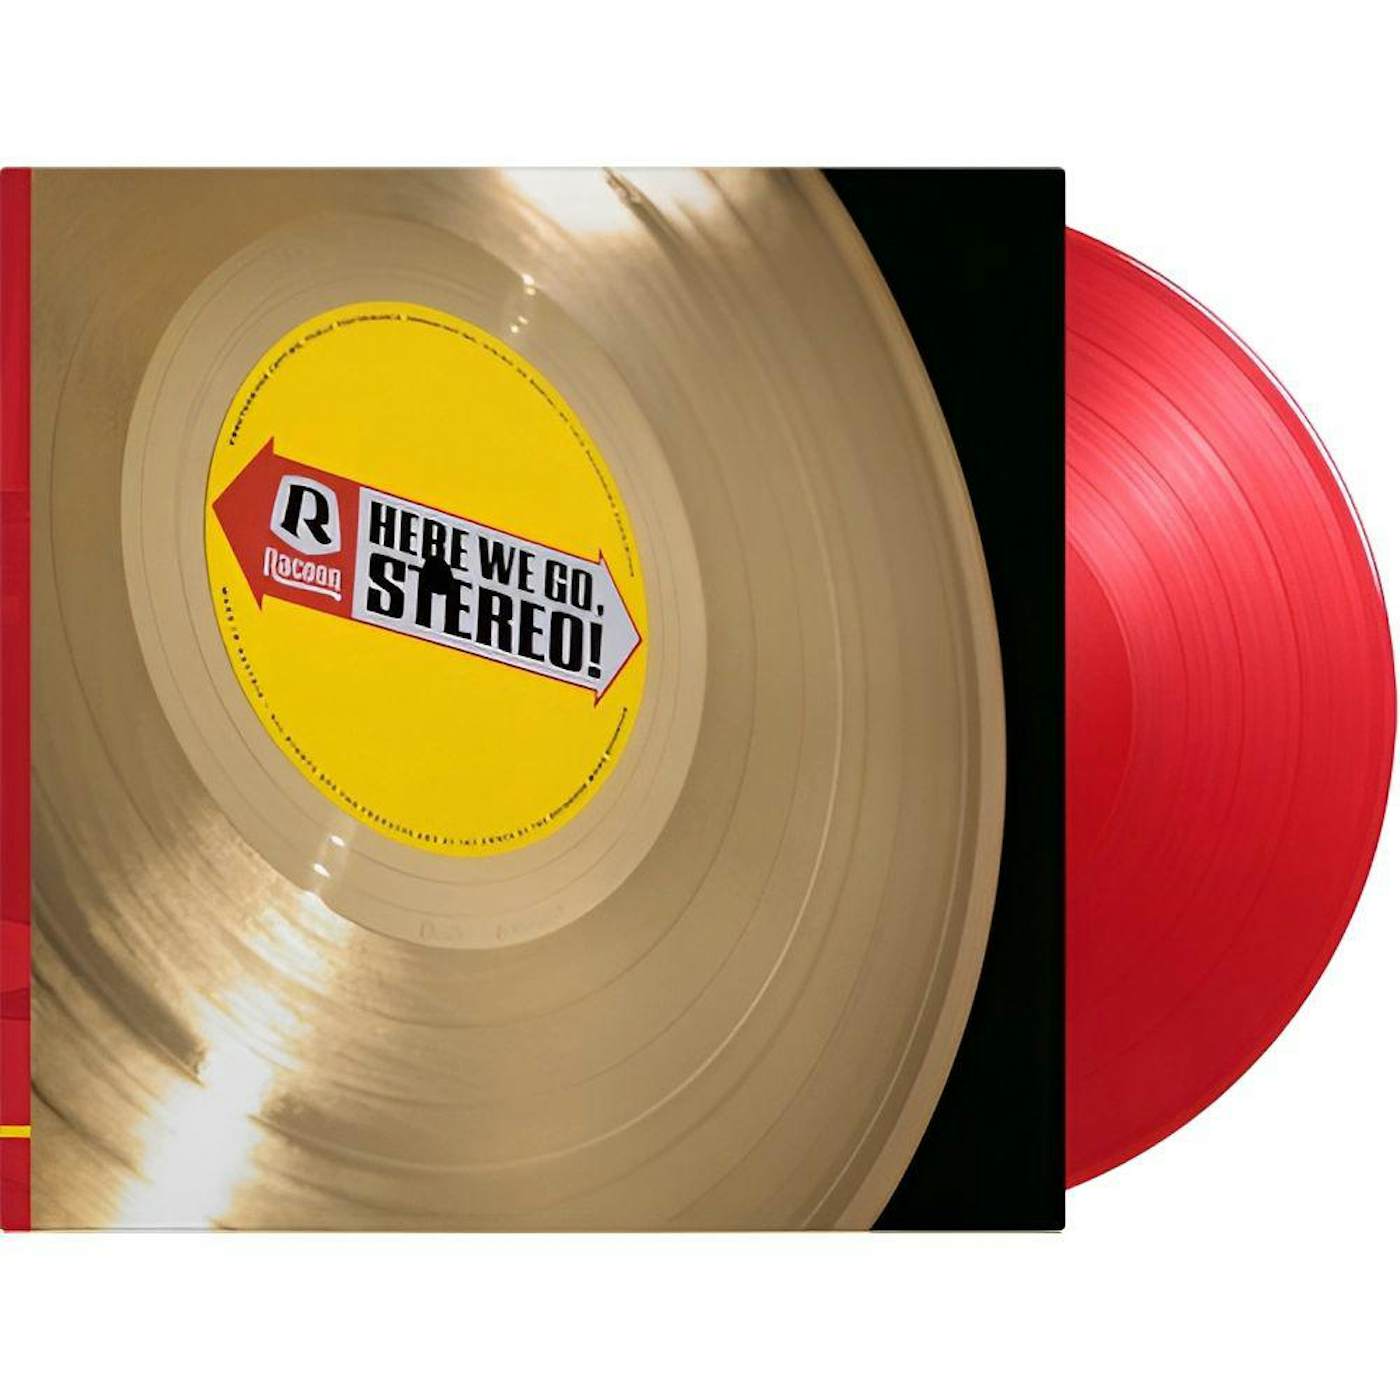 Racoon Here We Go, Stereo! (180g/Limited Red) Vinyl Record